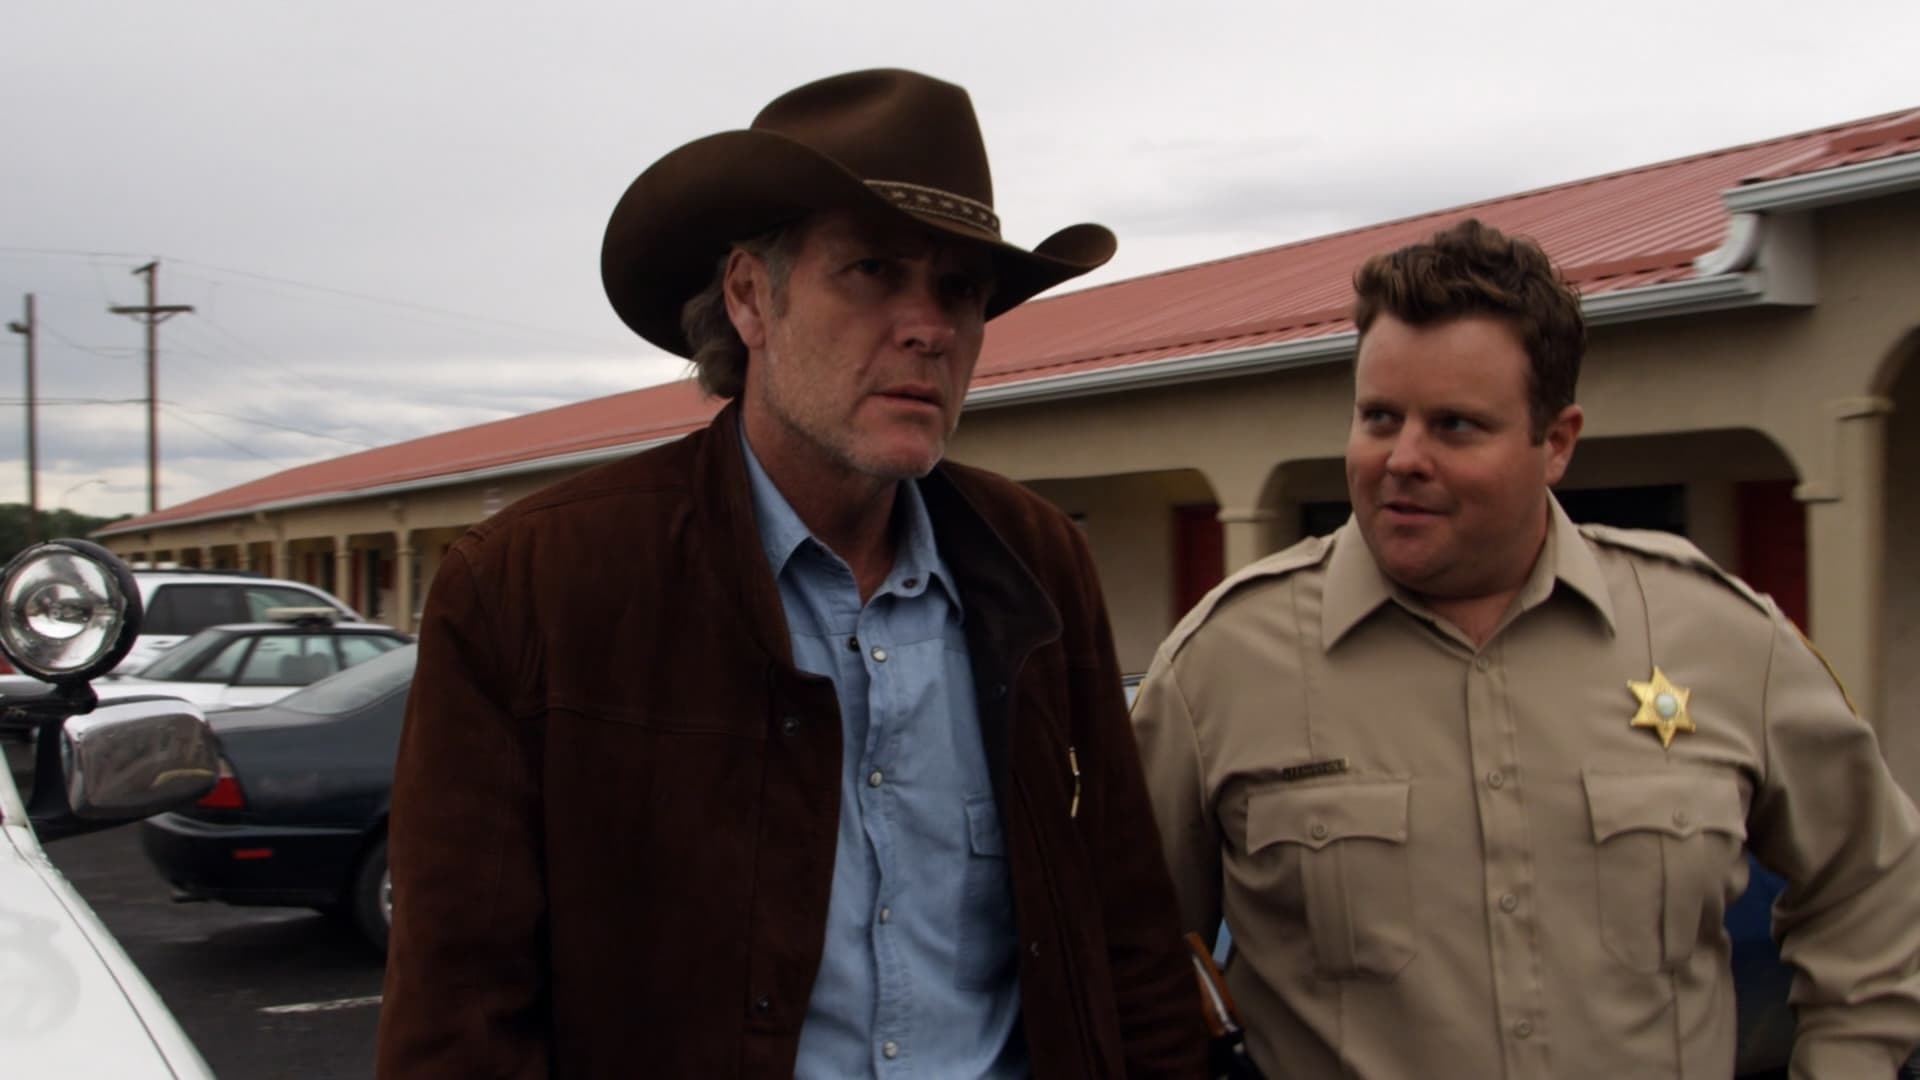 Longmire TV Series, Sheriff Longmire, Troubled past, Personal and professional challenges, 1920x1080 Full HD Desktop